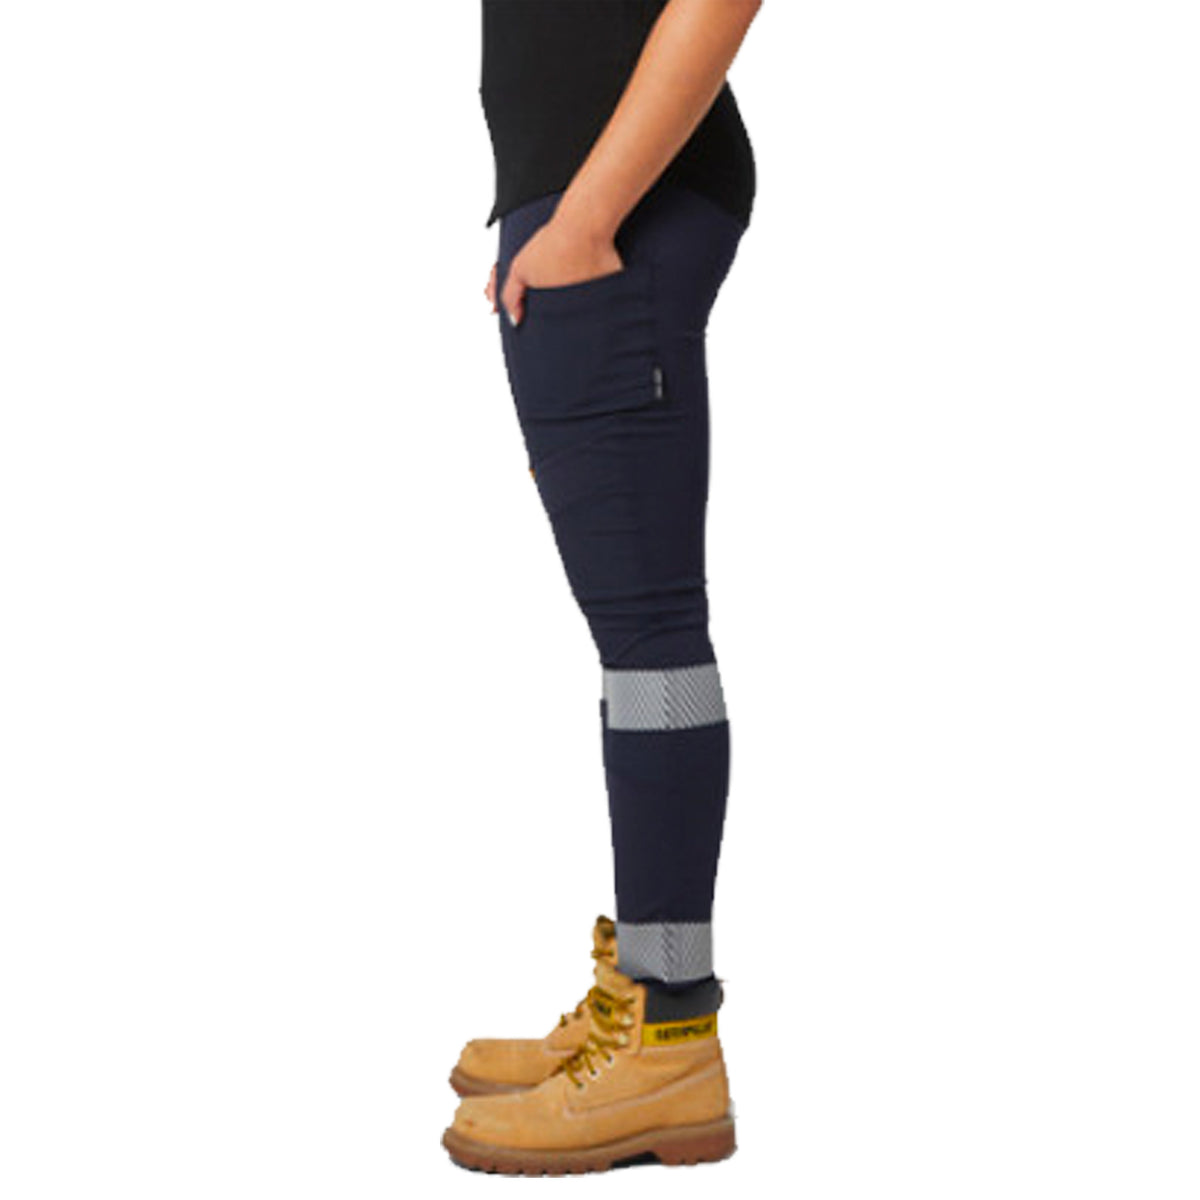 cat workwear womens stretch legging in navy with tape